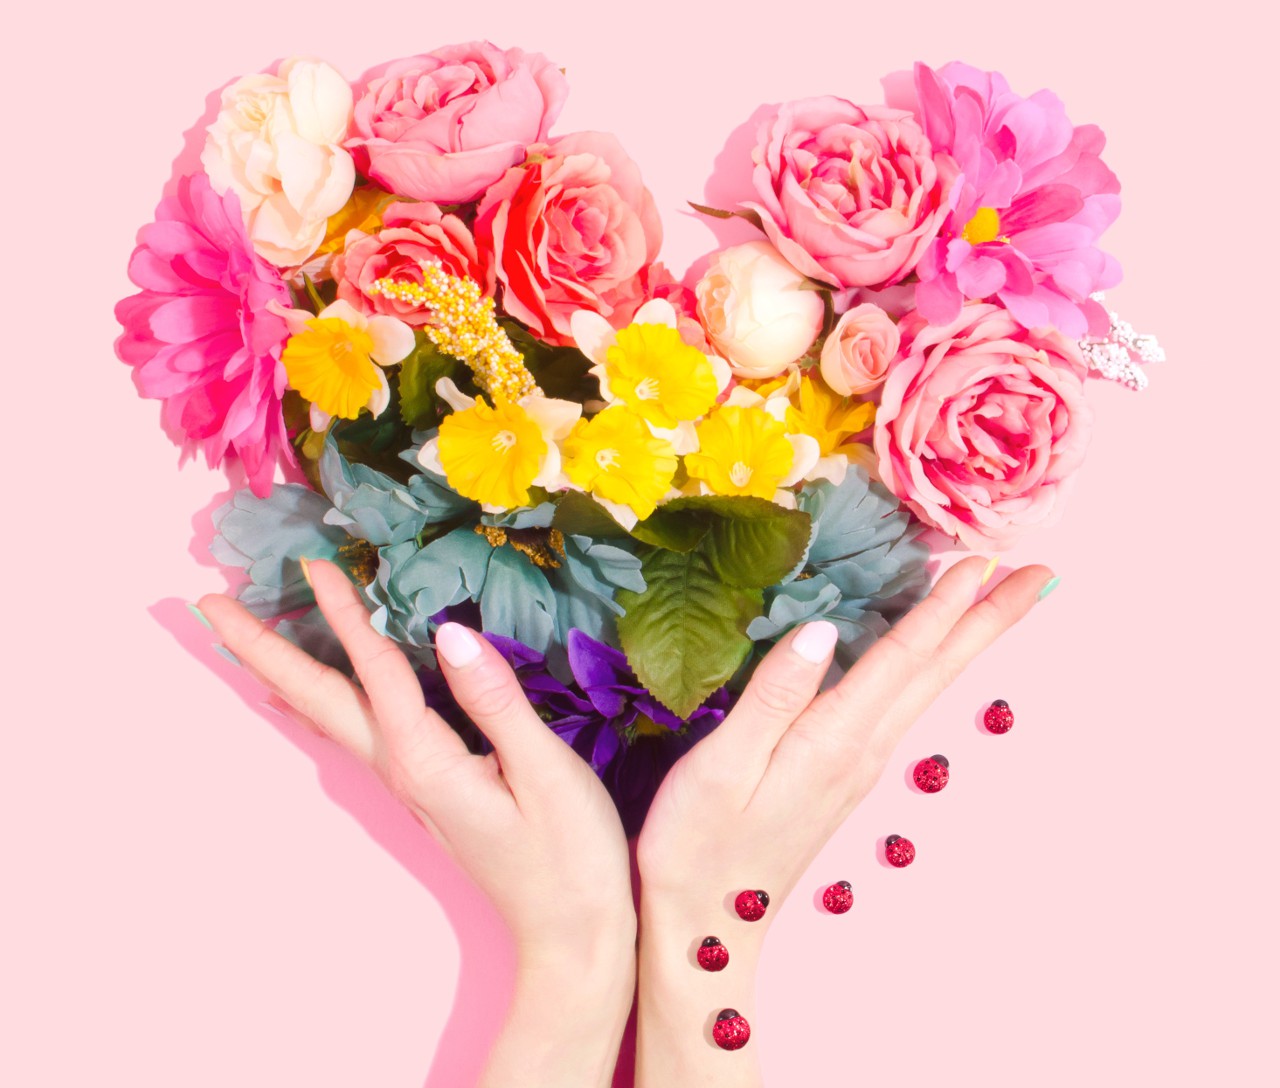 Open female hands holding bouquet of flowers in heart shape, with lady birds